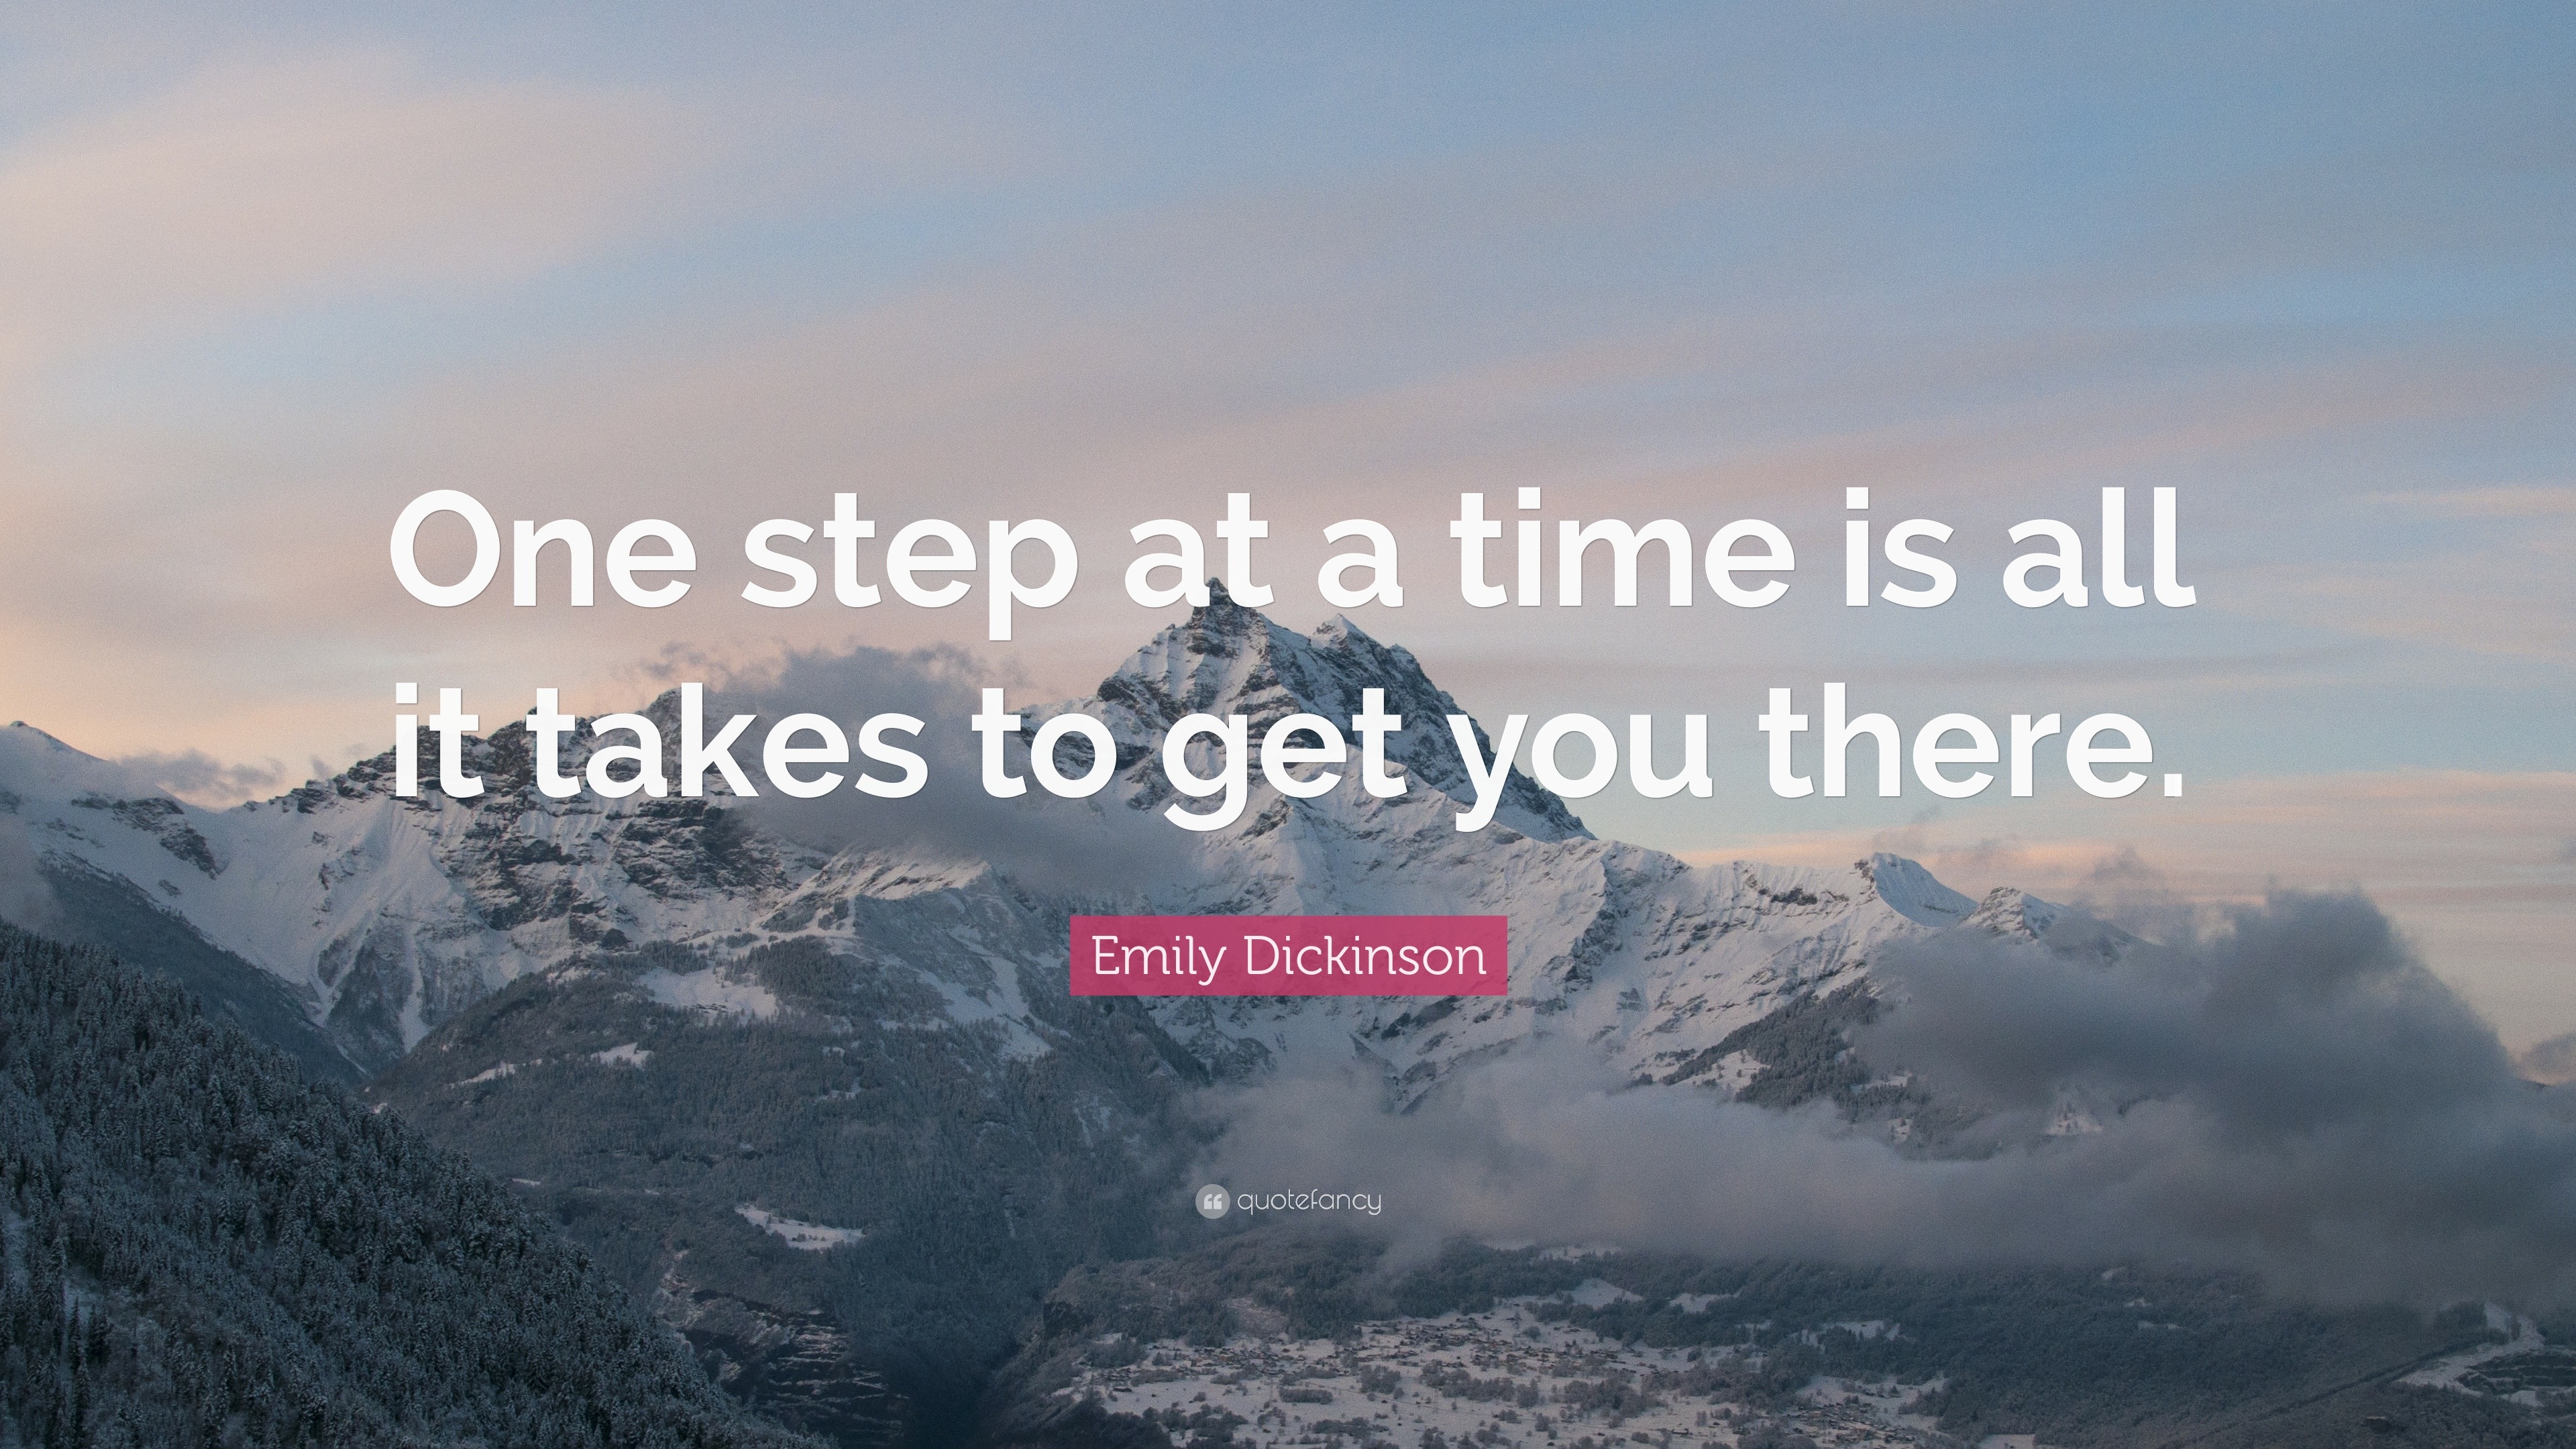 Emily Dickinson Quote: “One step at a time is all it takes to get